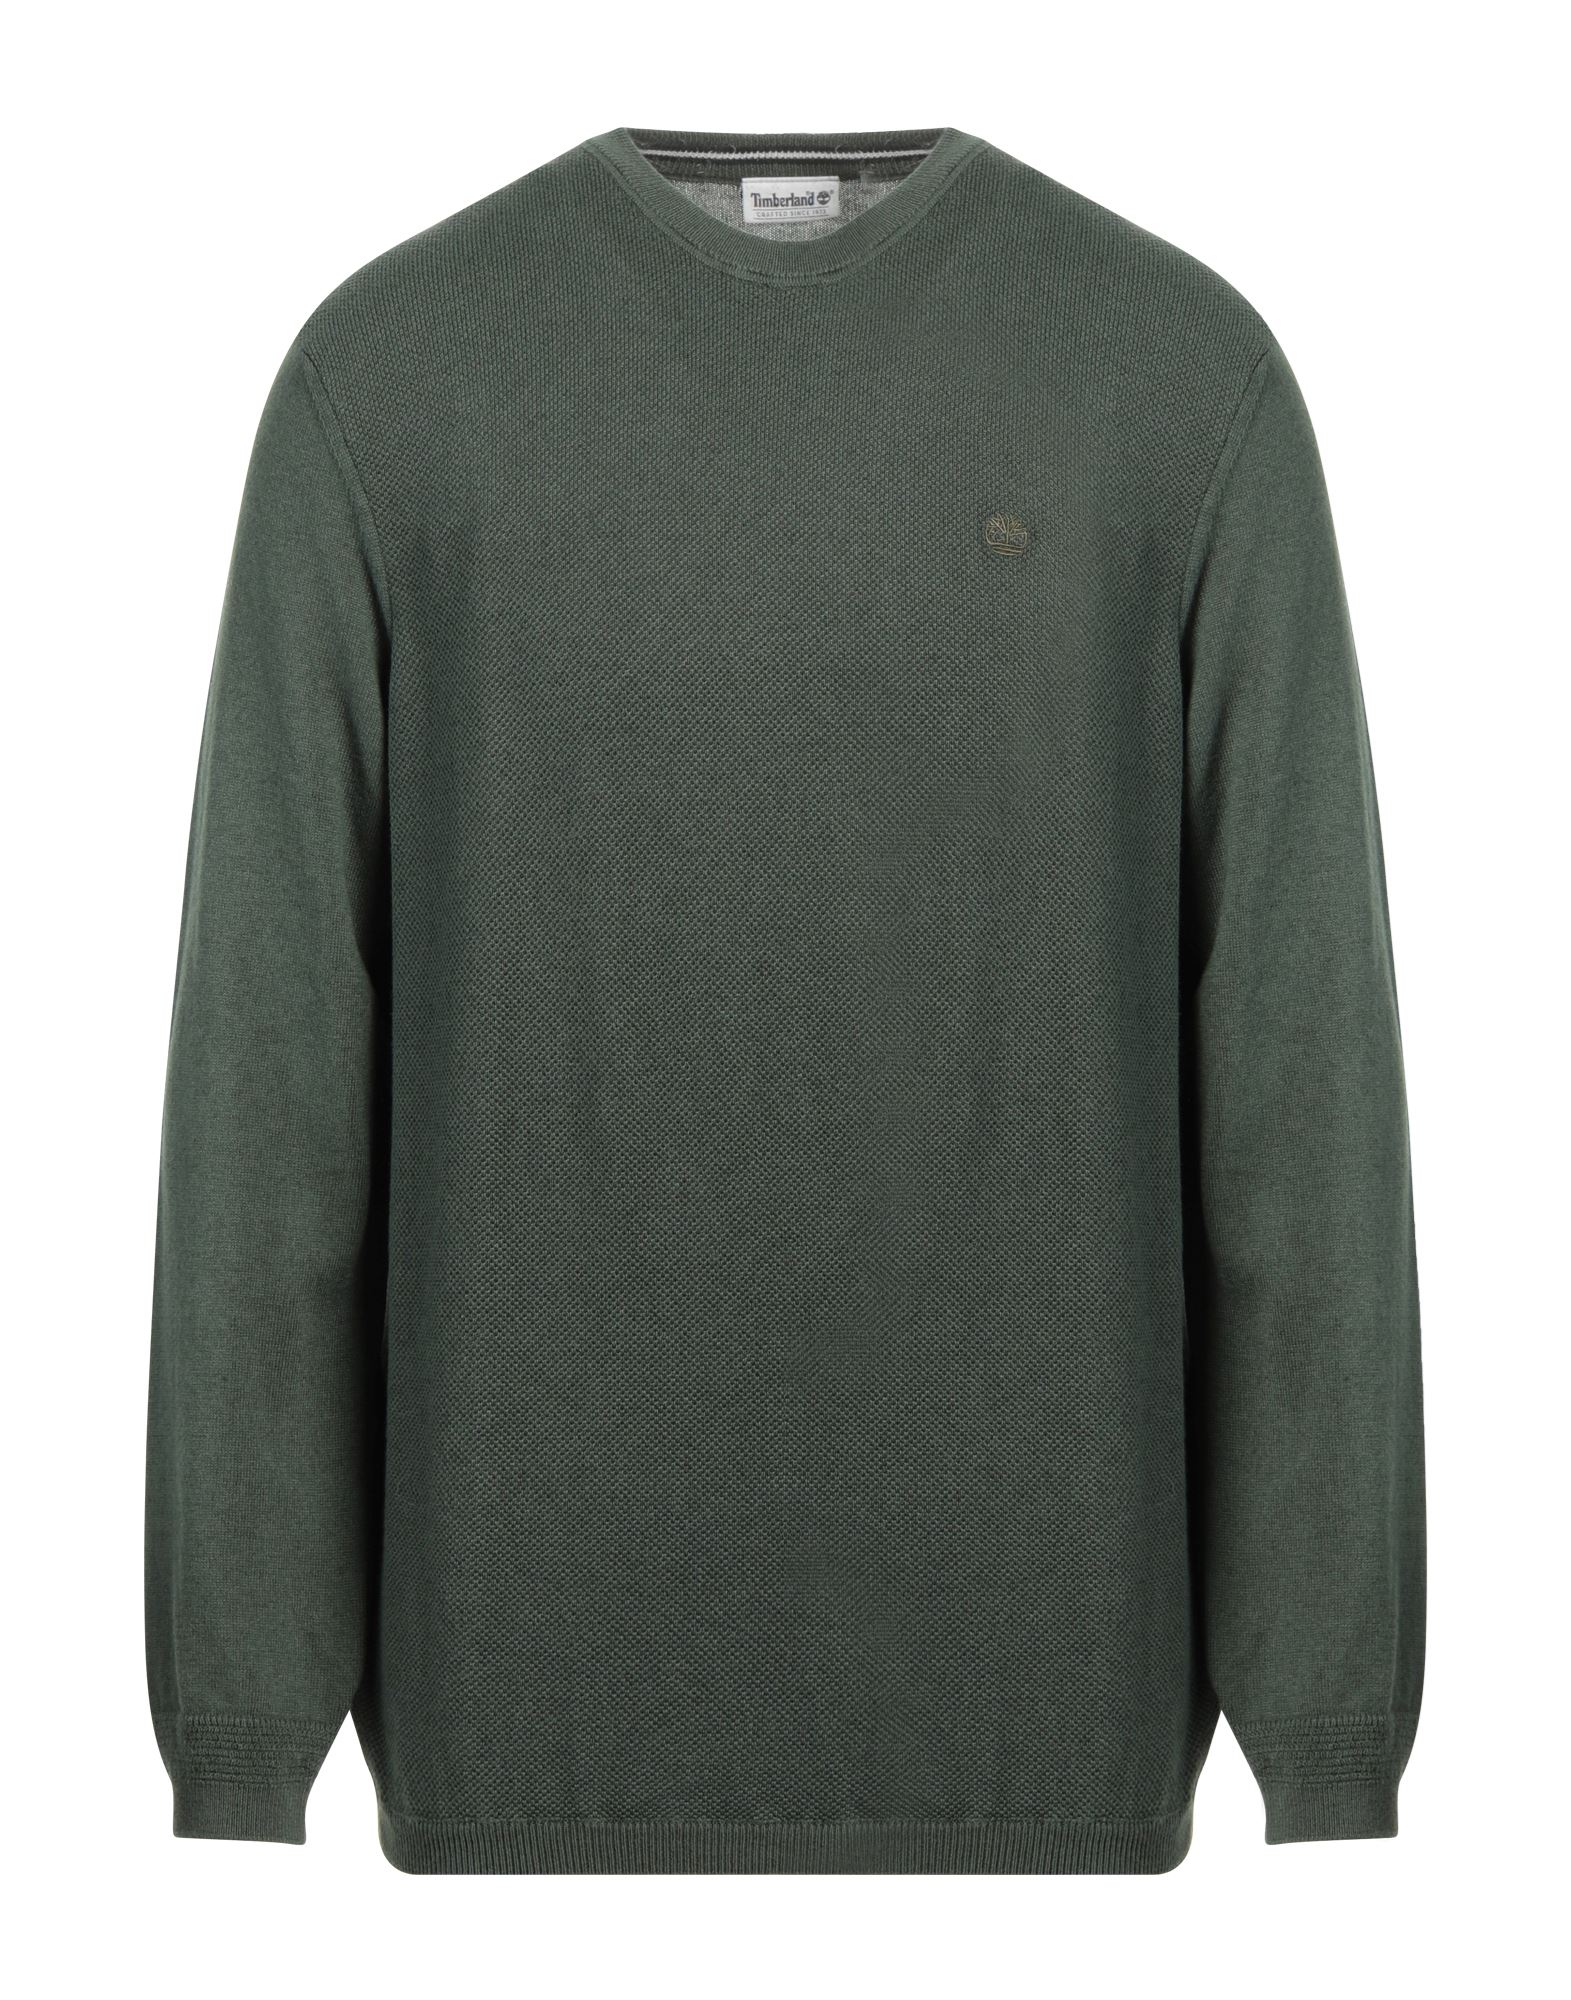 Timberland Sweaters In Military Green | ModeSens